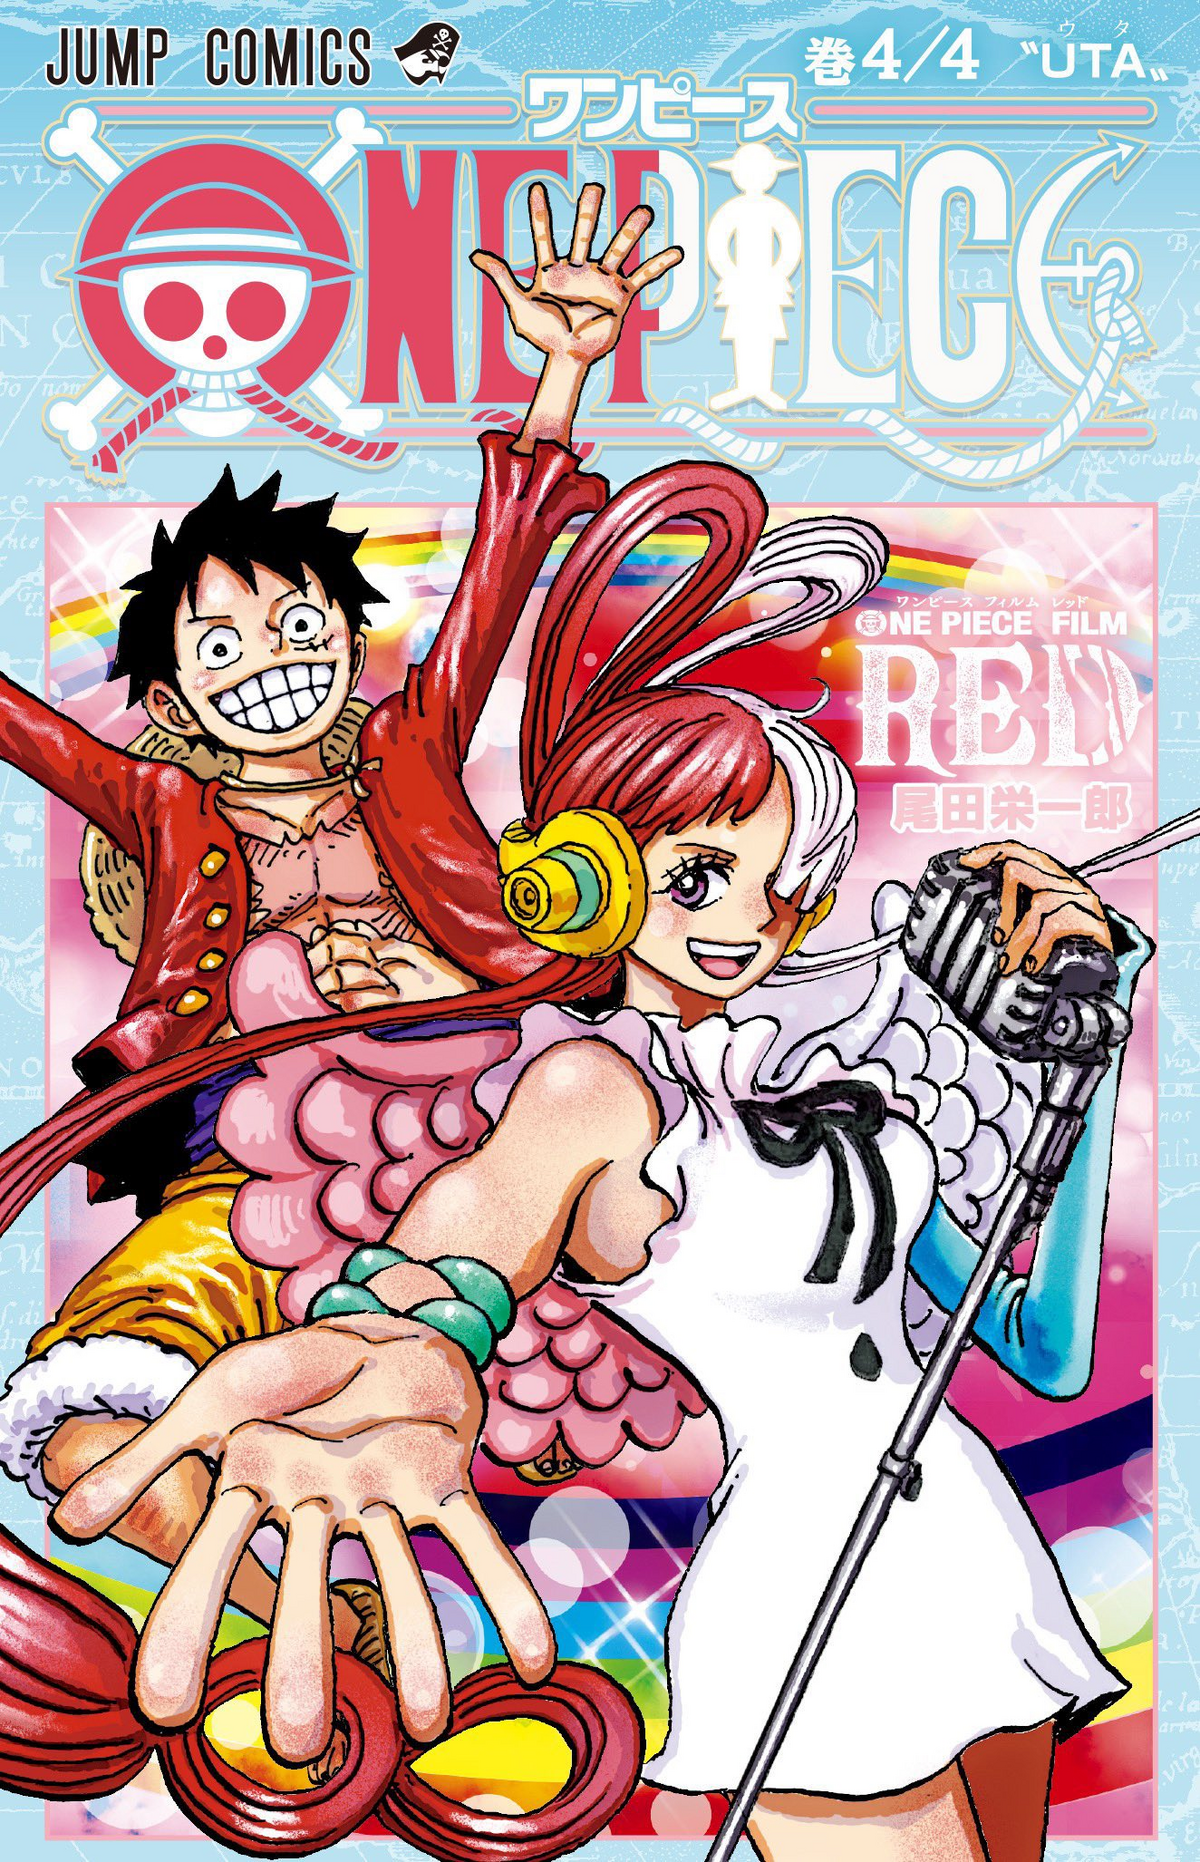 All 105 'ONE PIECE' Volumes Have Now Sold Over a Million Copies Each